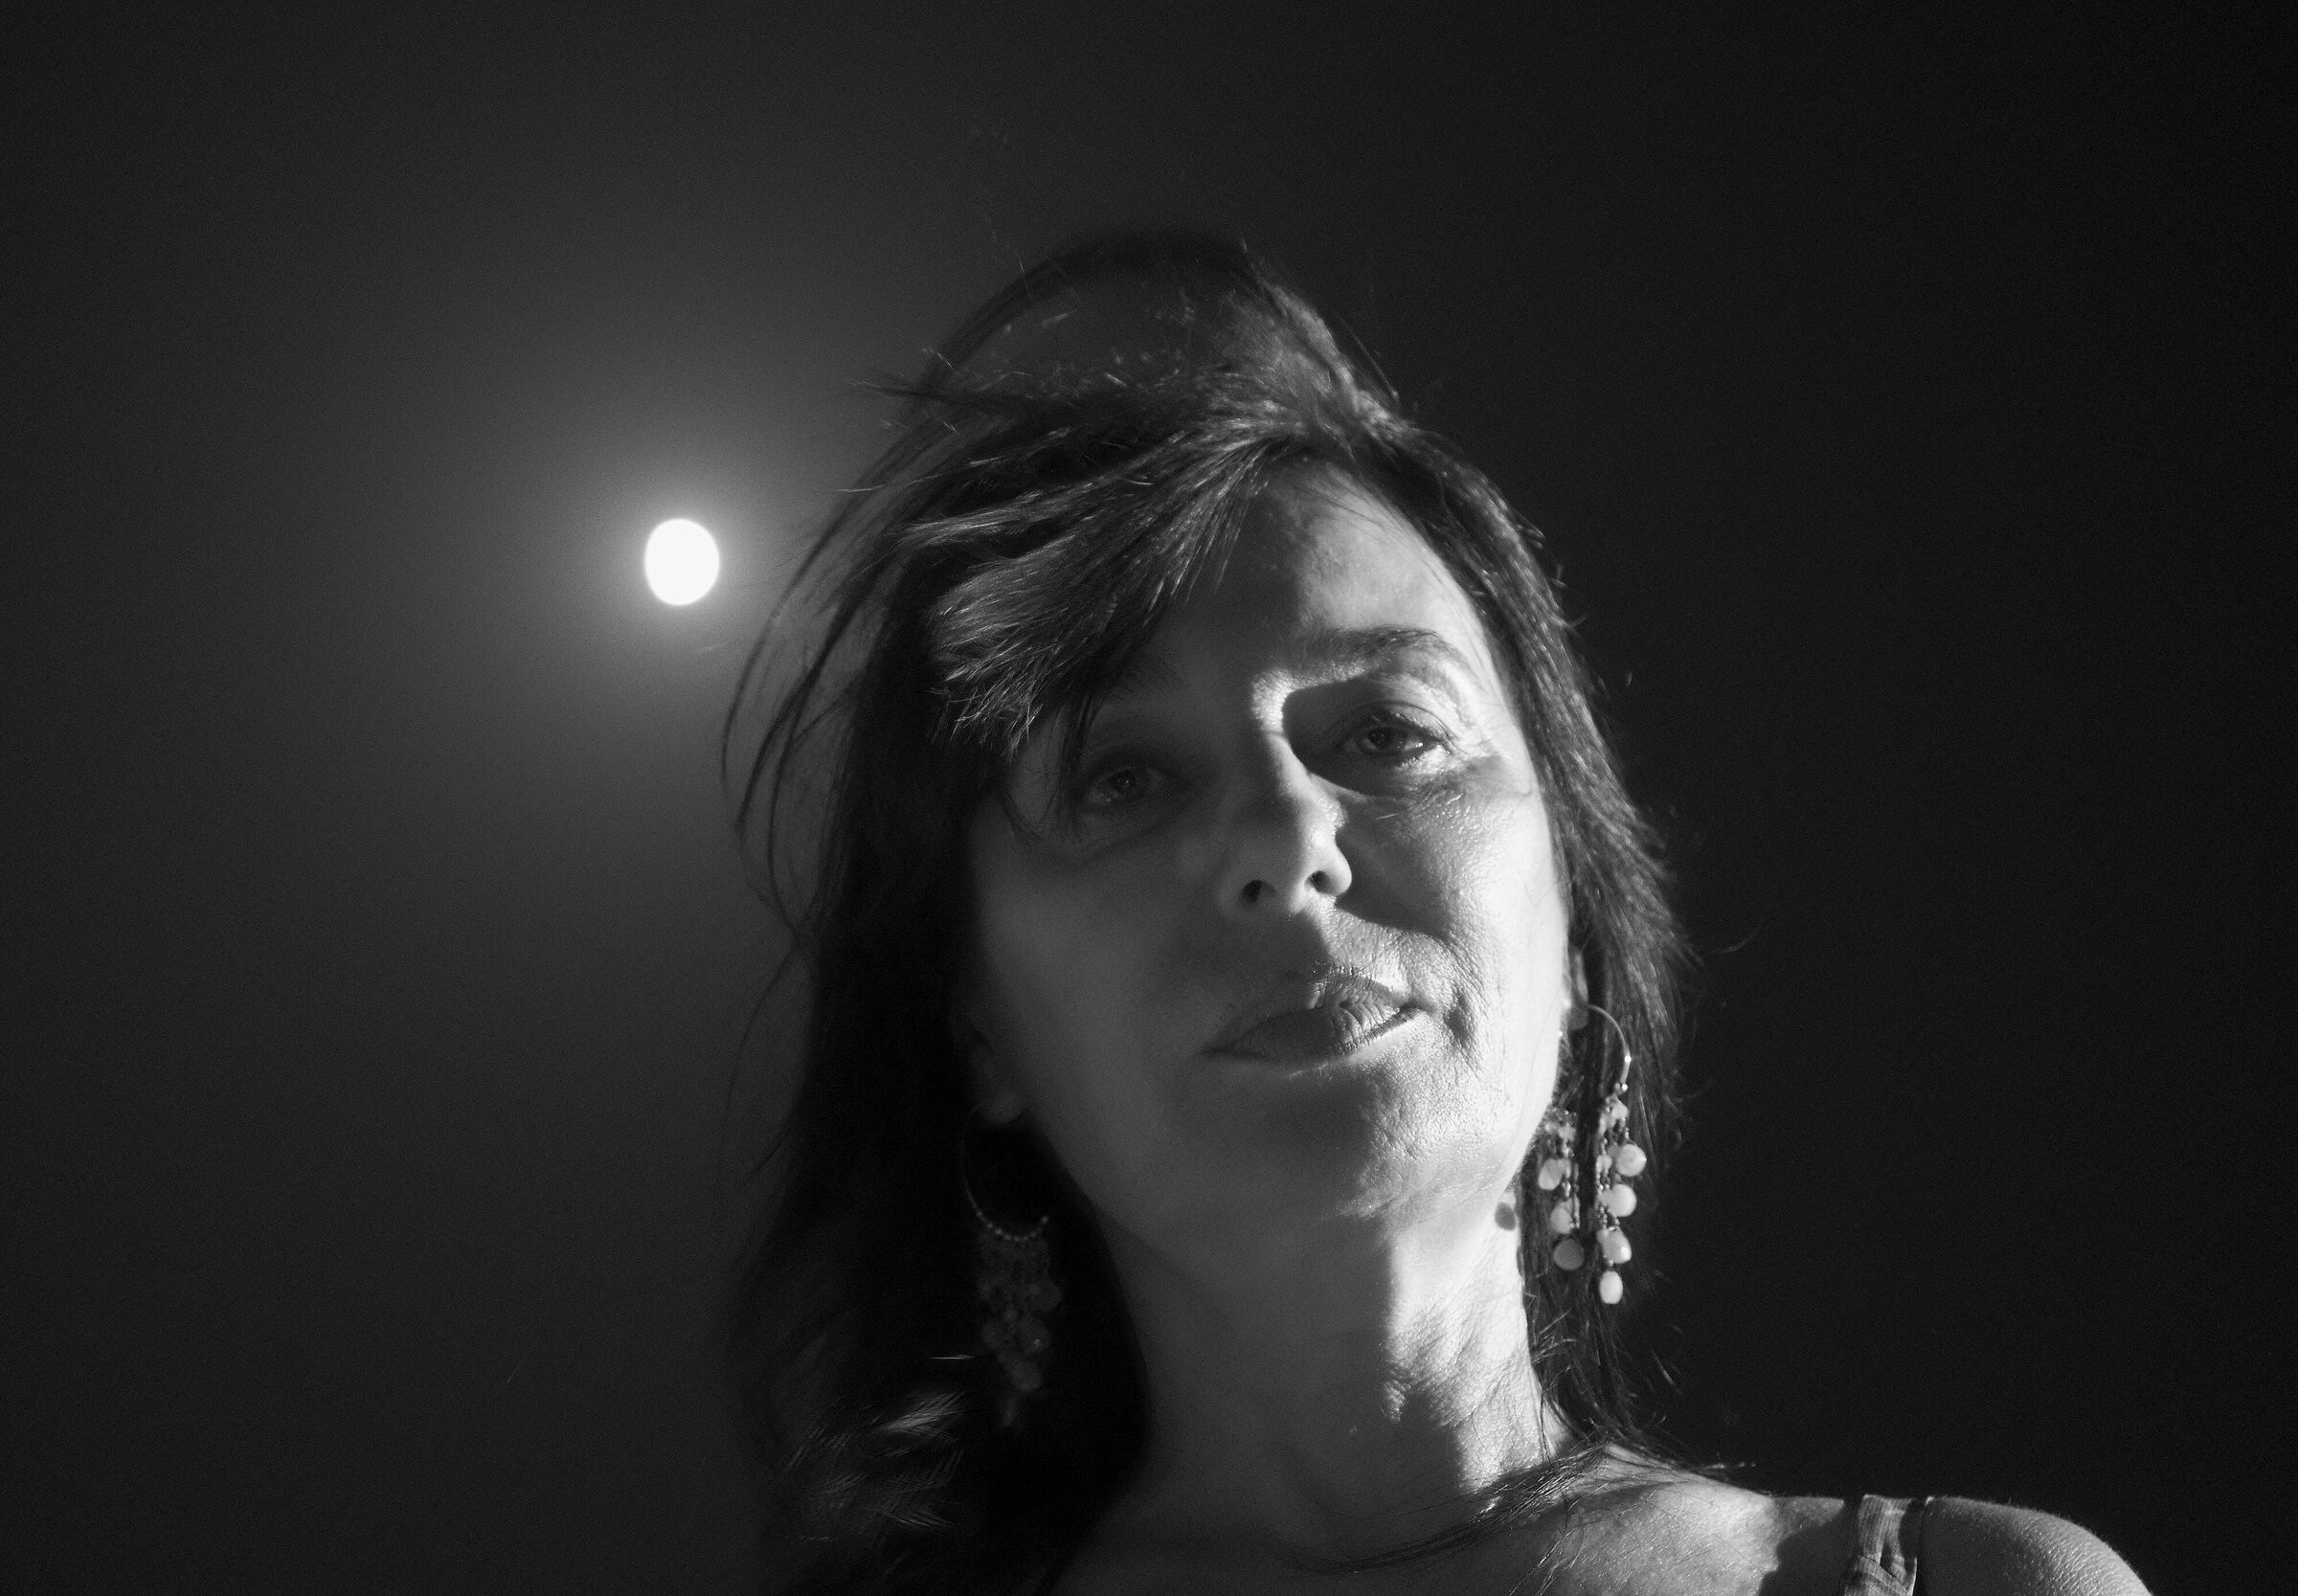 Carla and her moon...